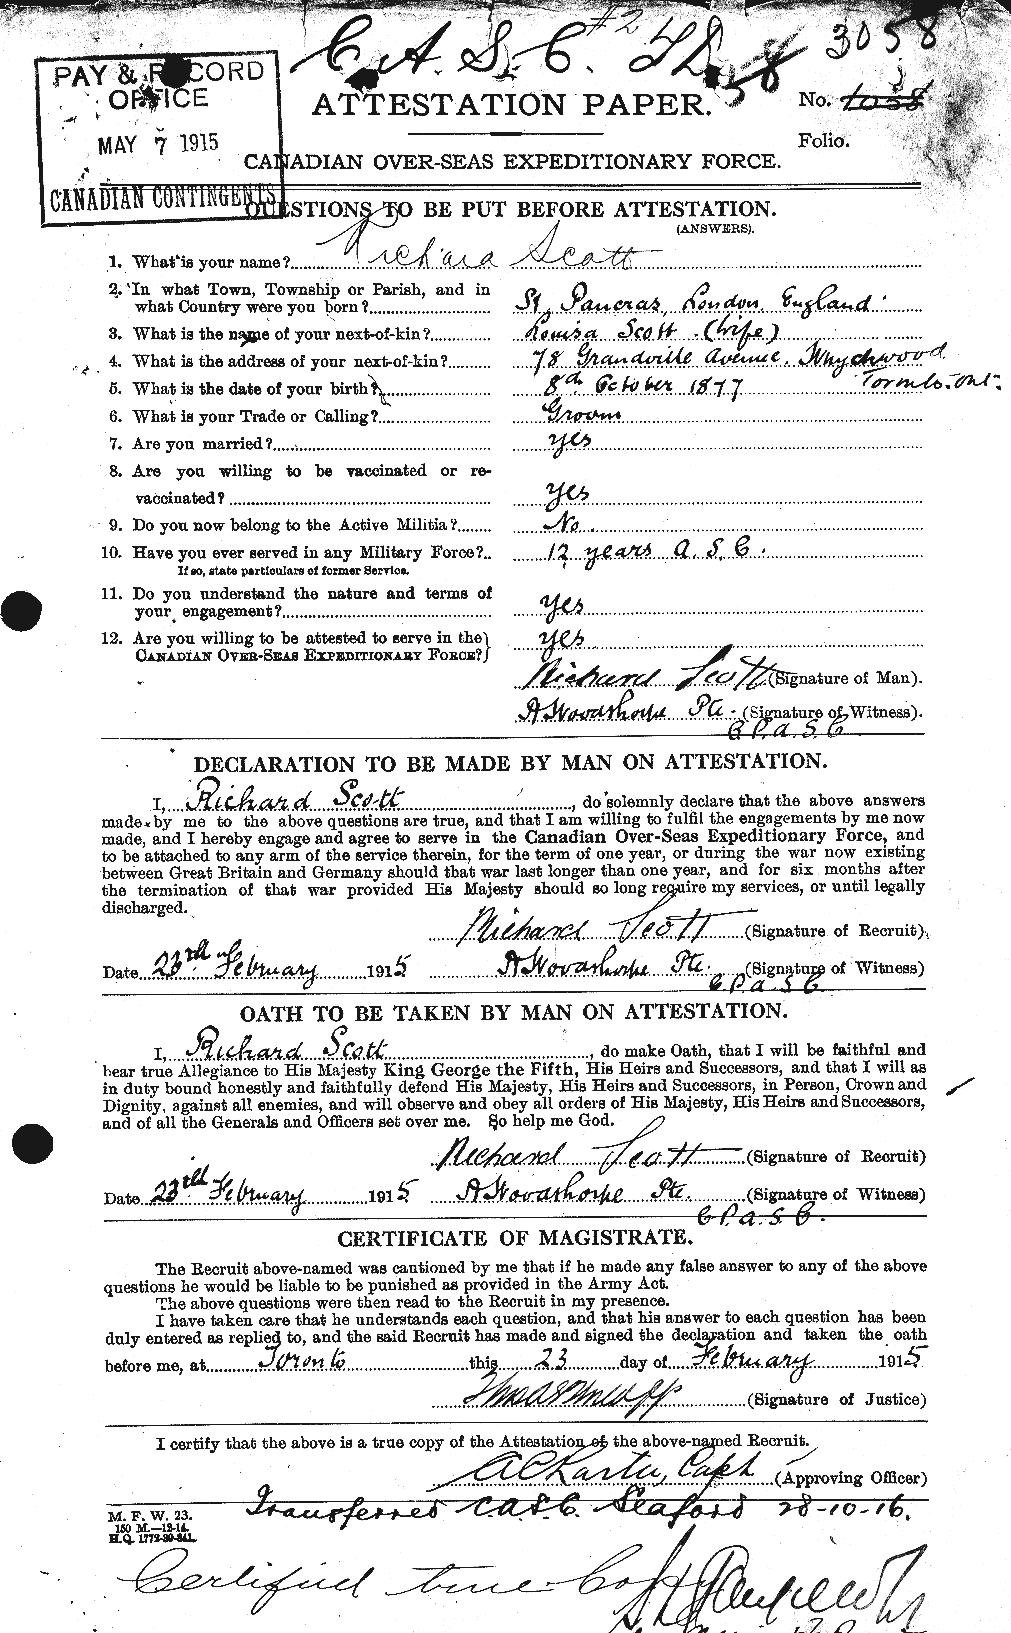 Personnel Records of the First World War - CEF 090187a